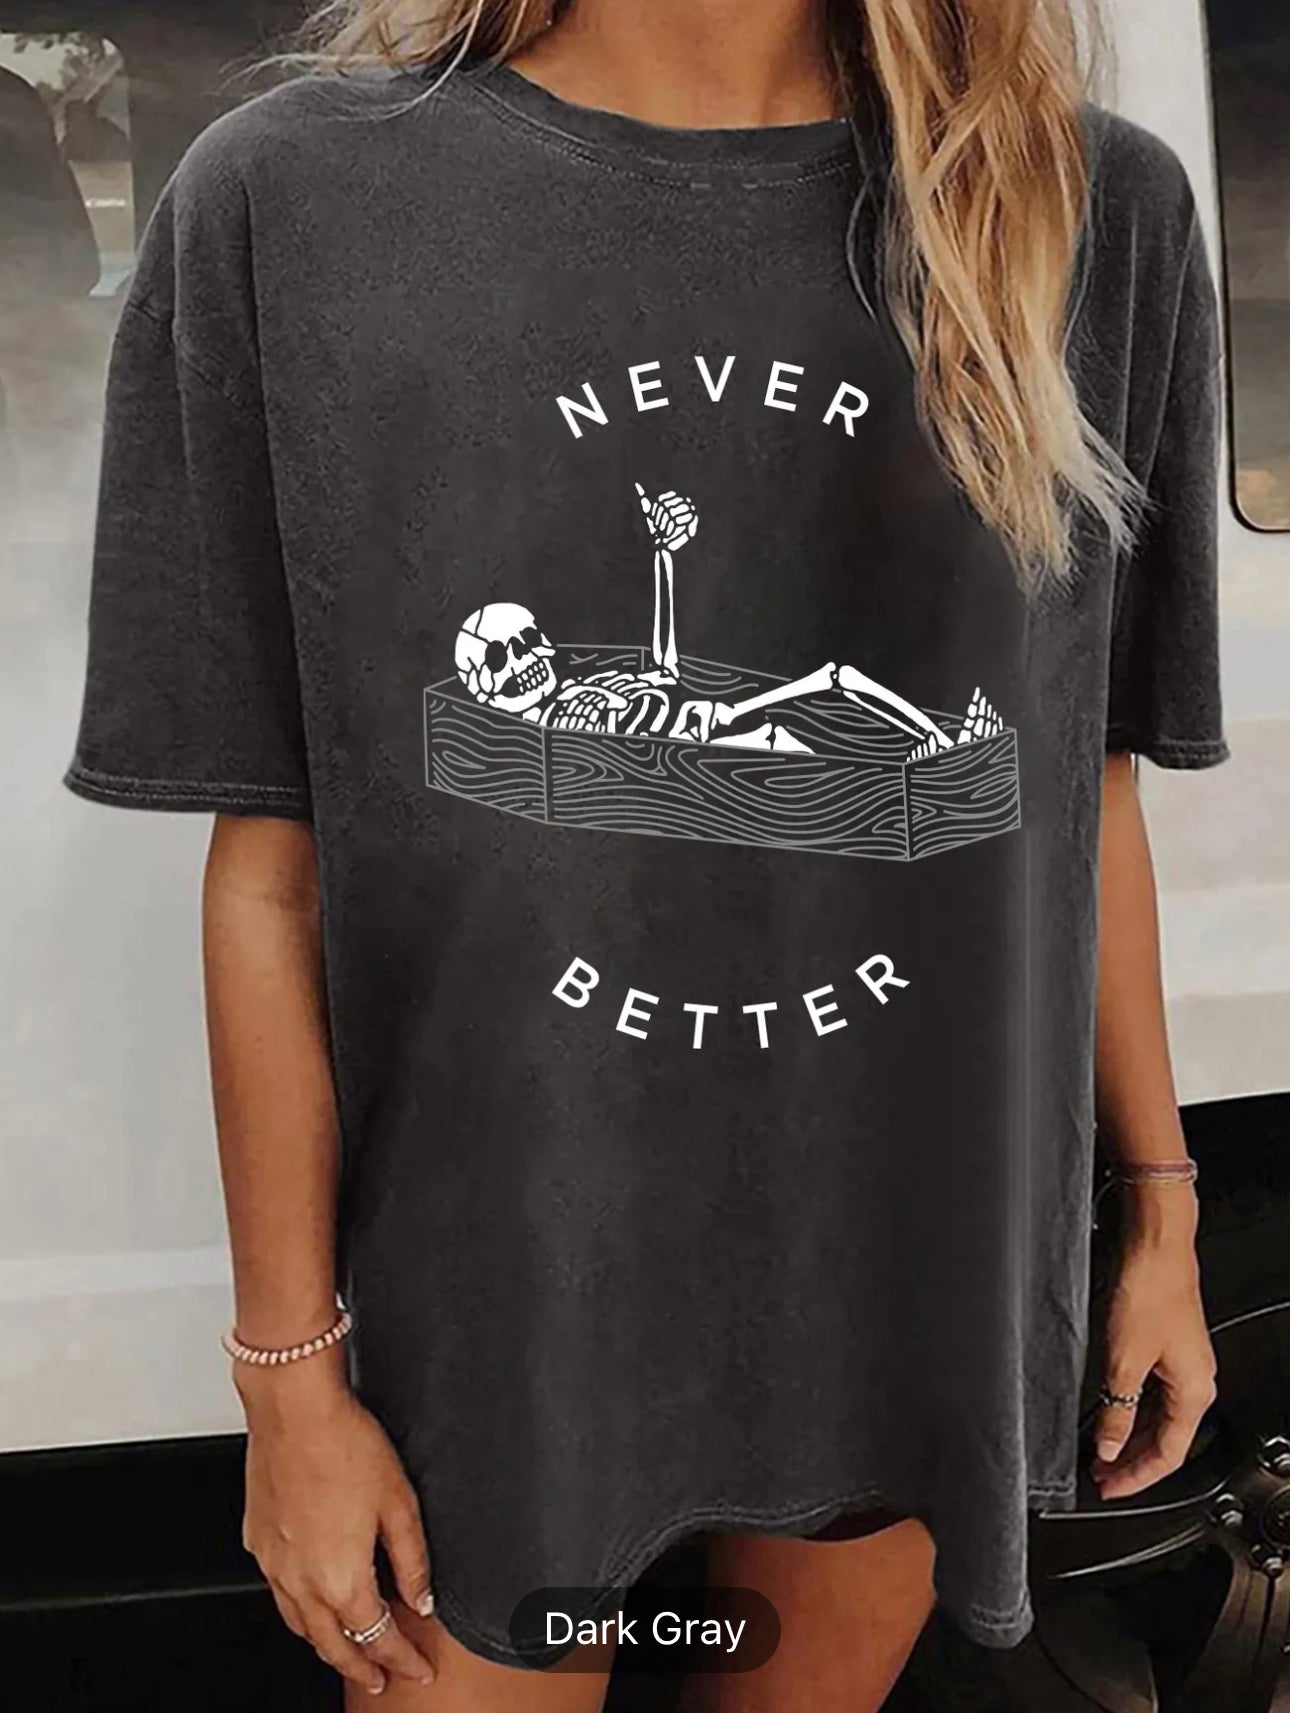 Women's Vintage Skull Print T-Shirt - Perfect for Halloween Casual Wear!